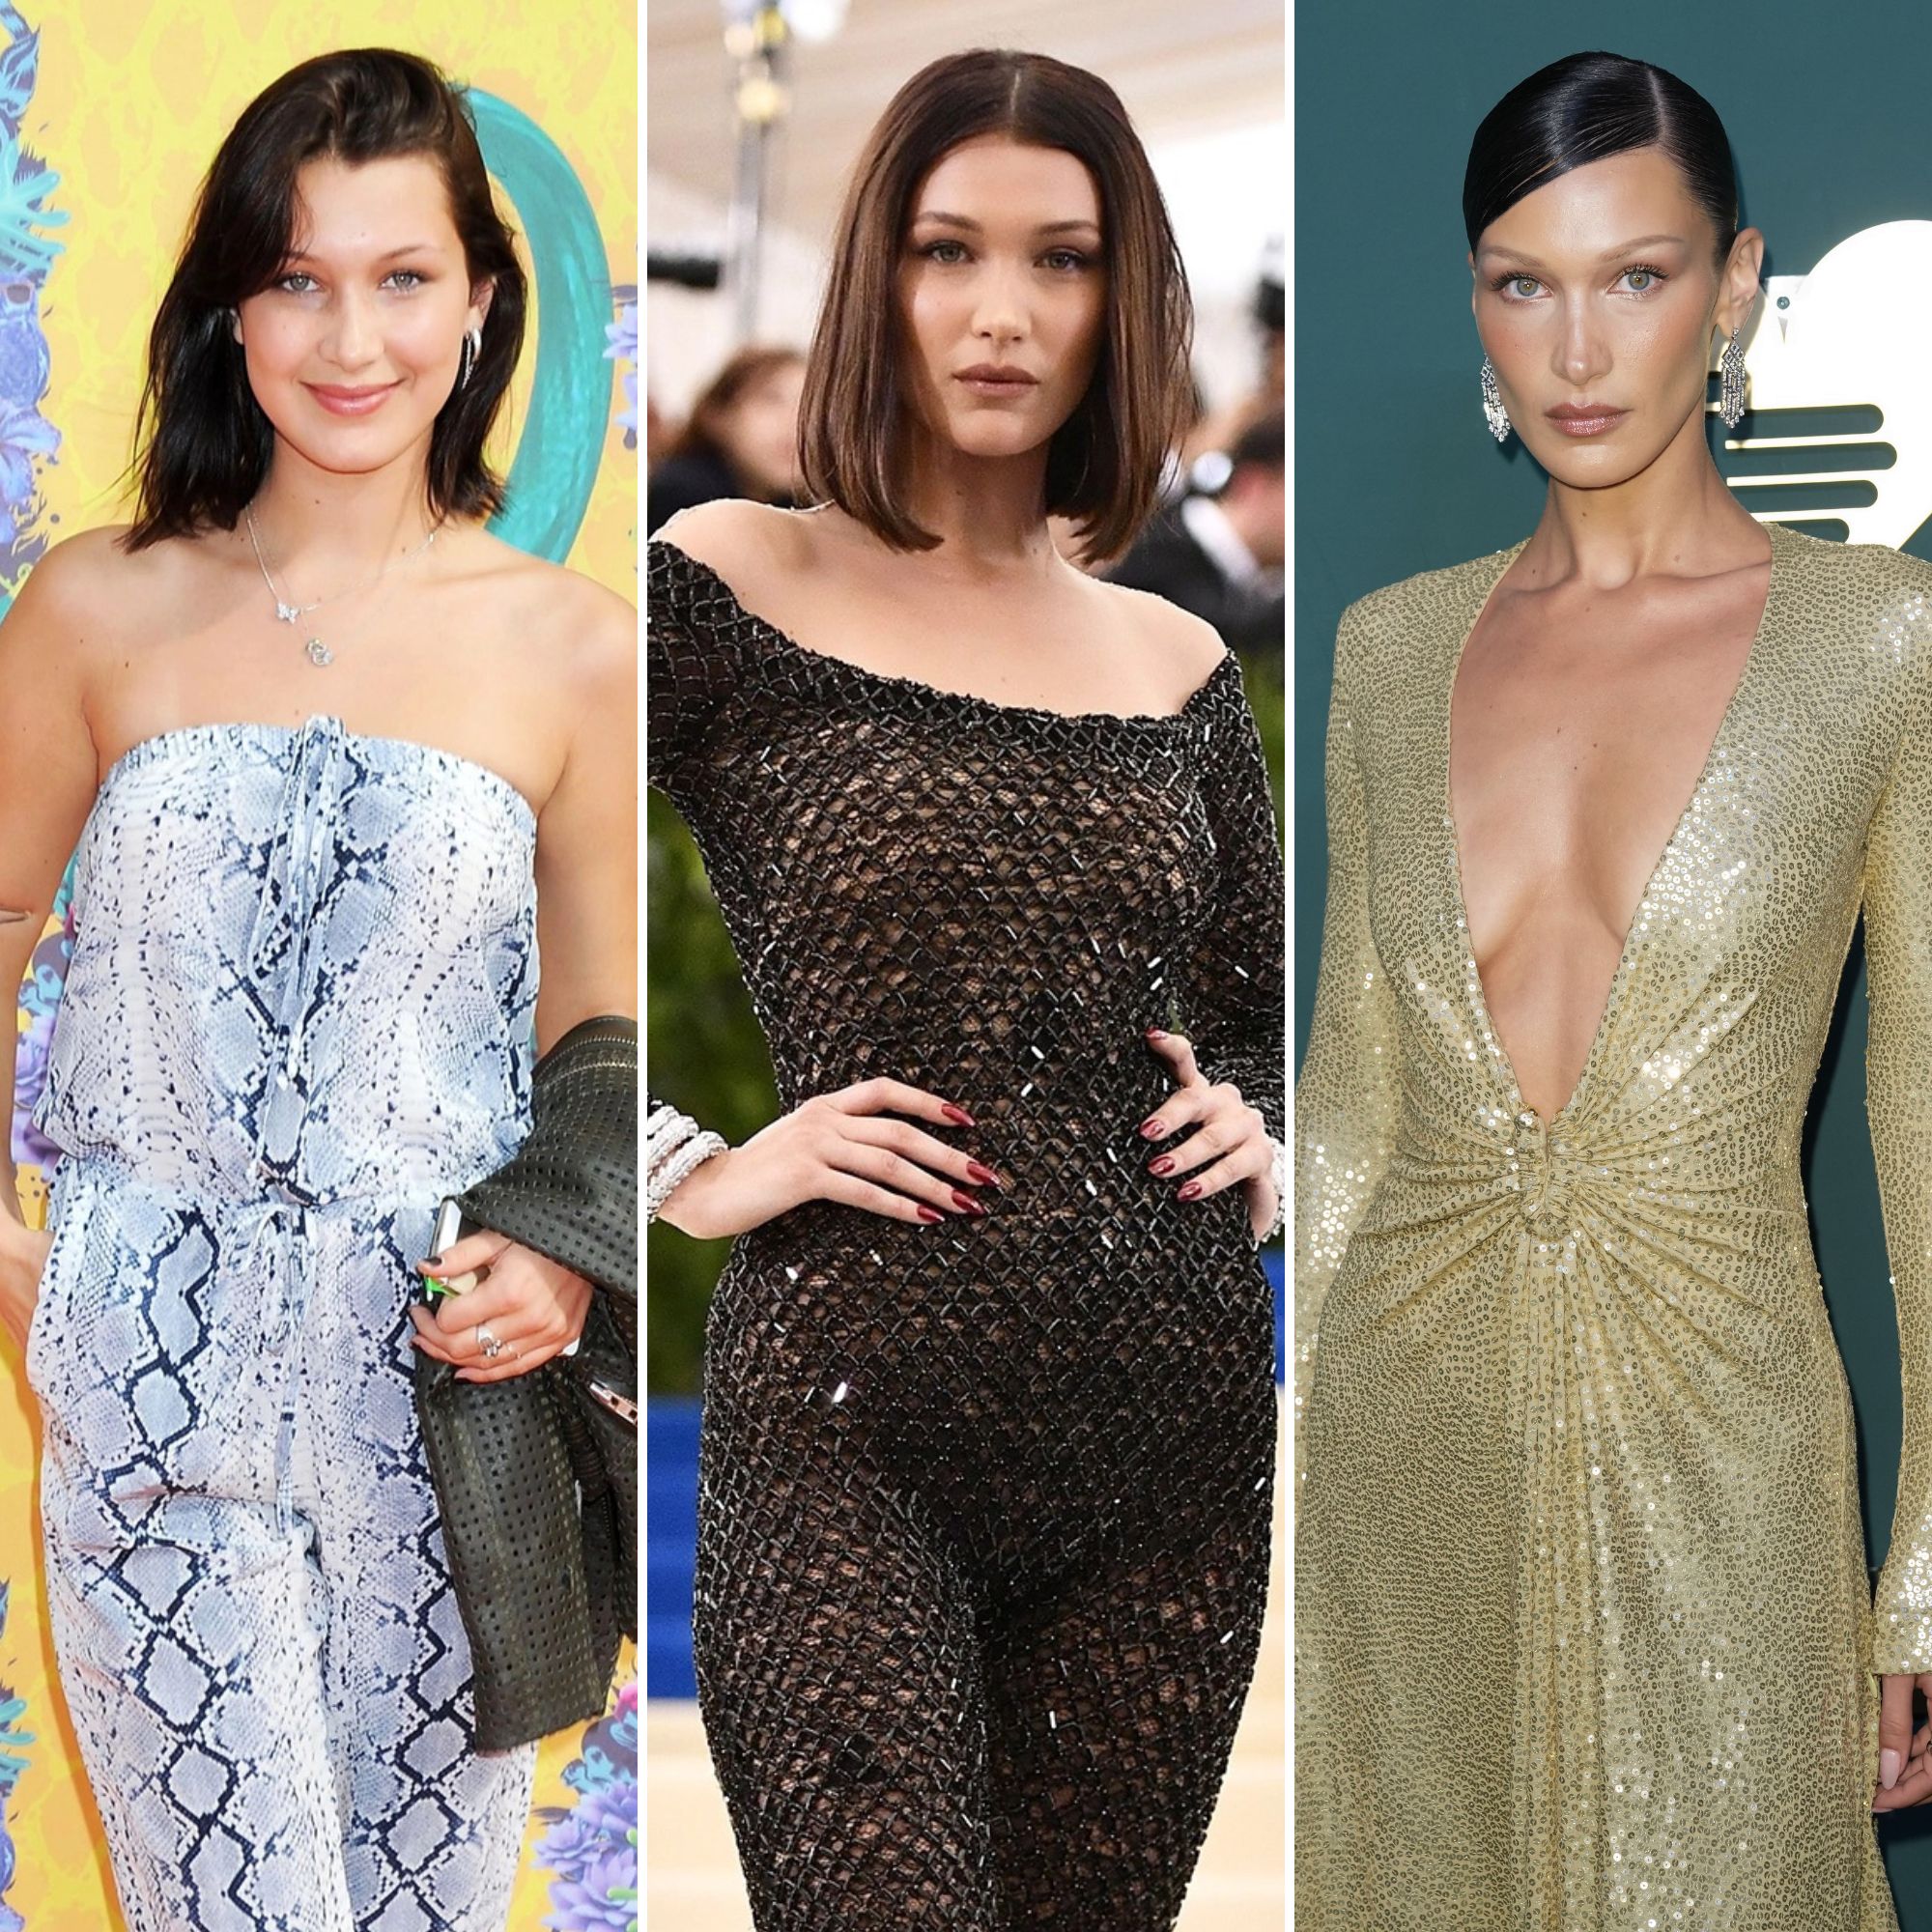 Bella Hadid's Style Evolution: Sexy to Quirky